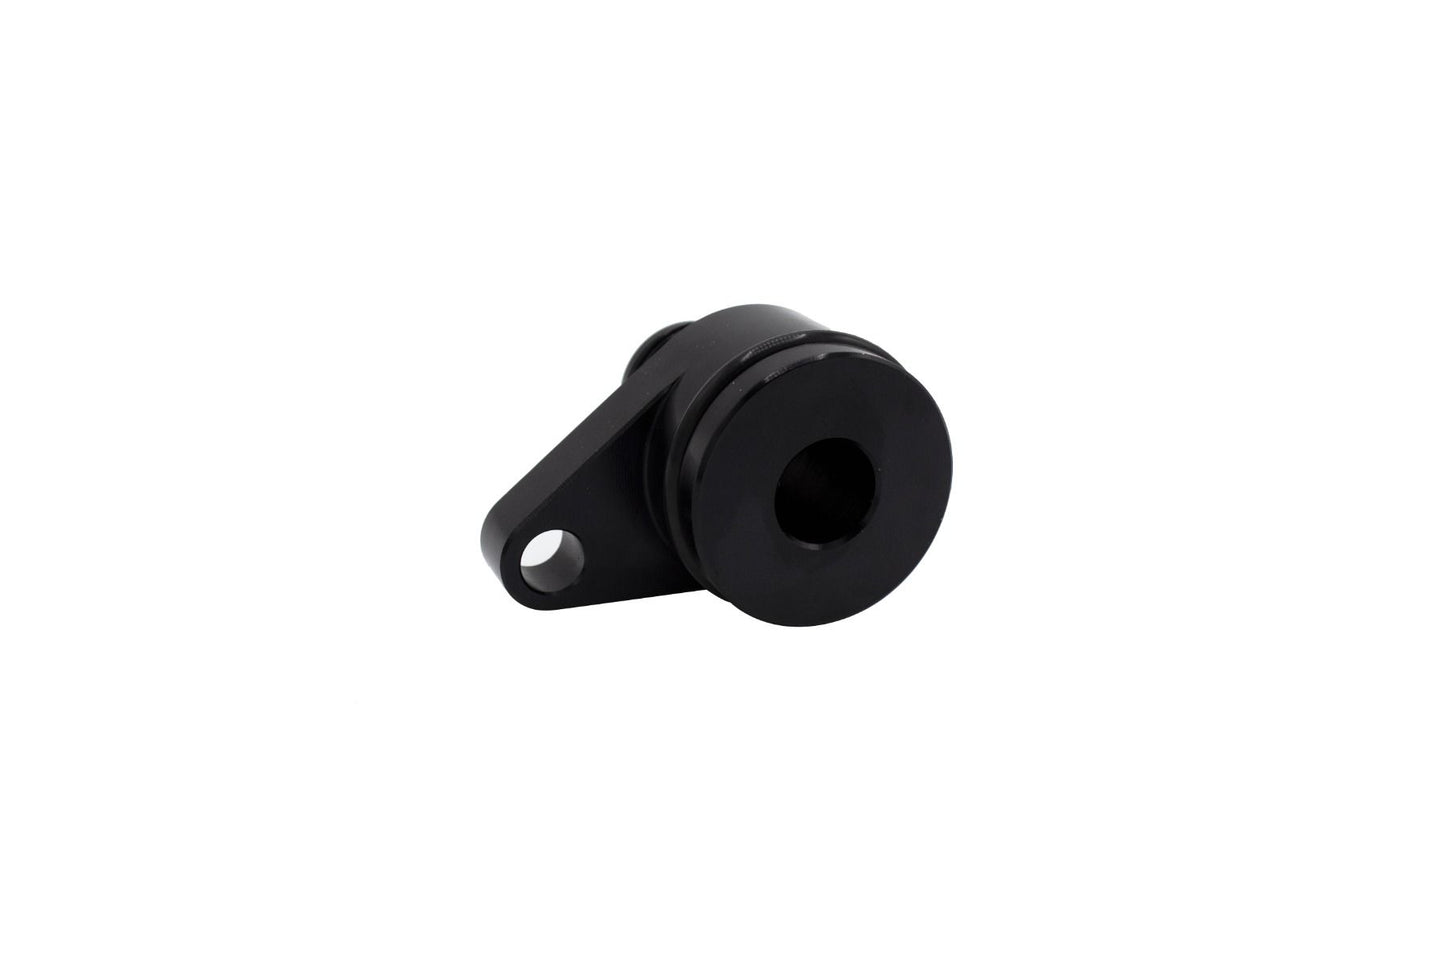 FPE-34224-B Fleece Adapter fitting, -10AN Male to 1.325" bore Hell On Wheels Canada